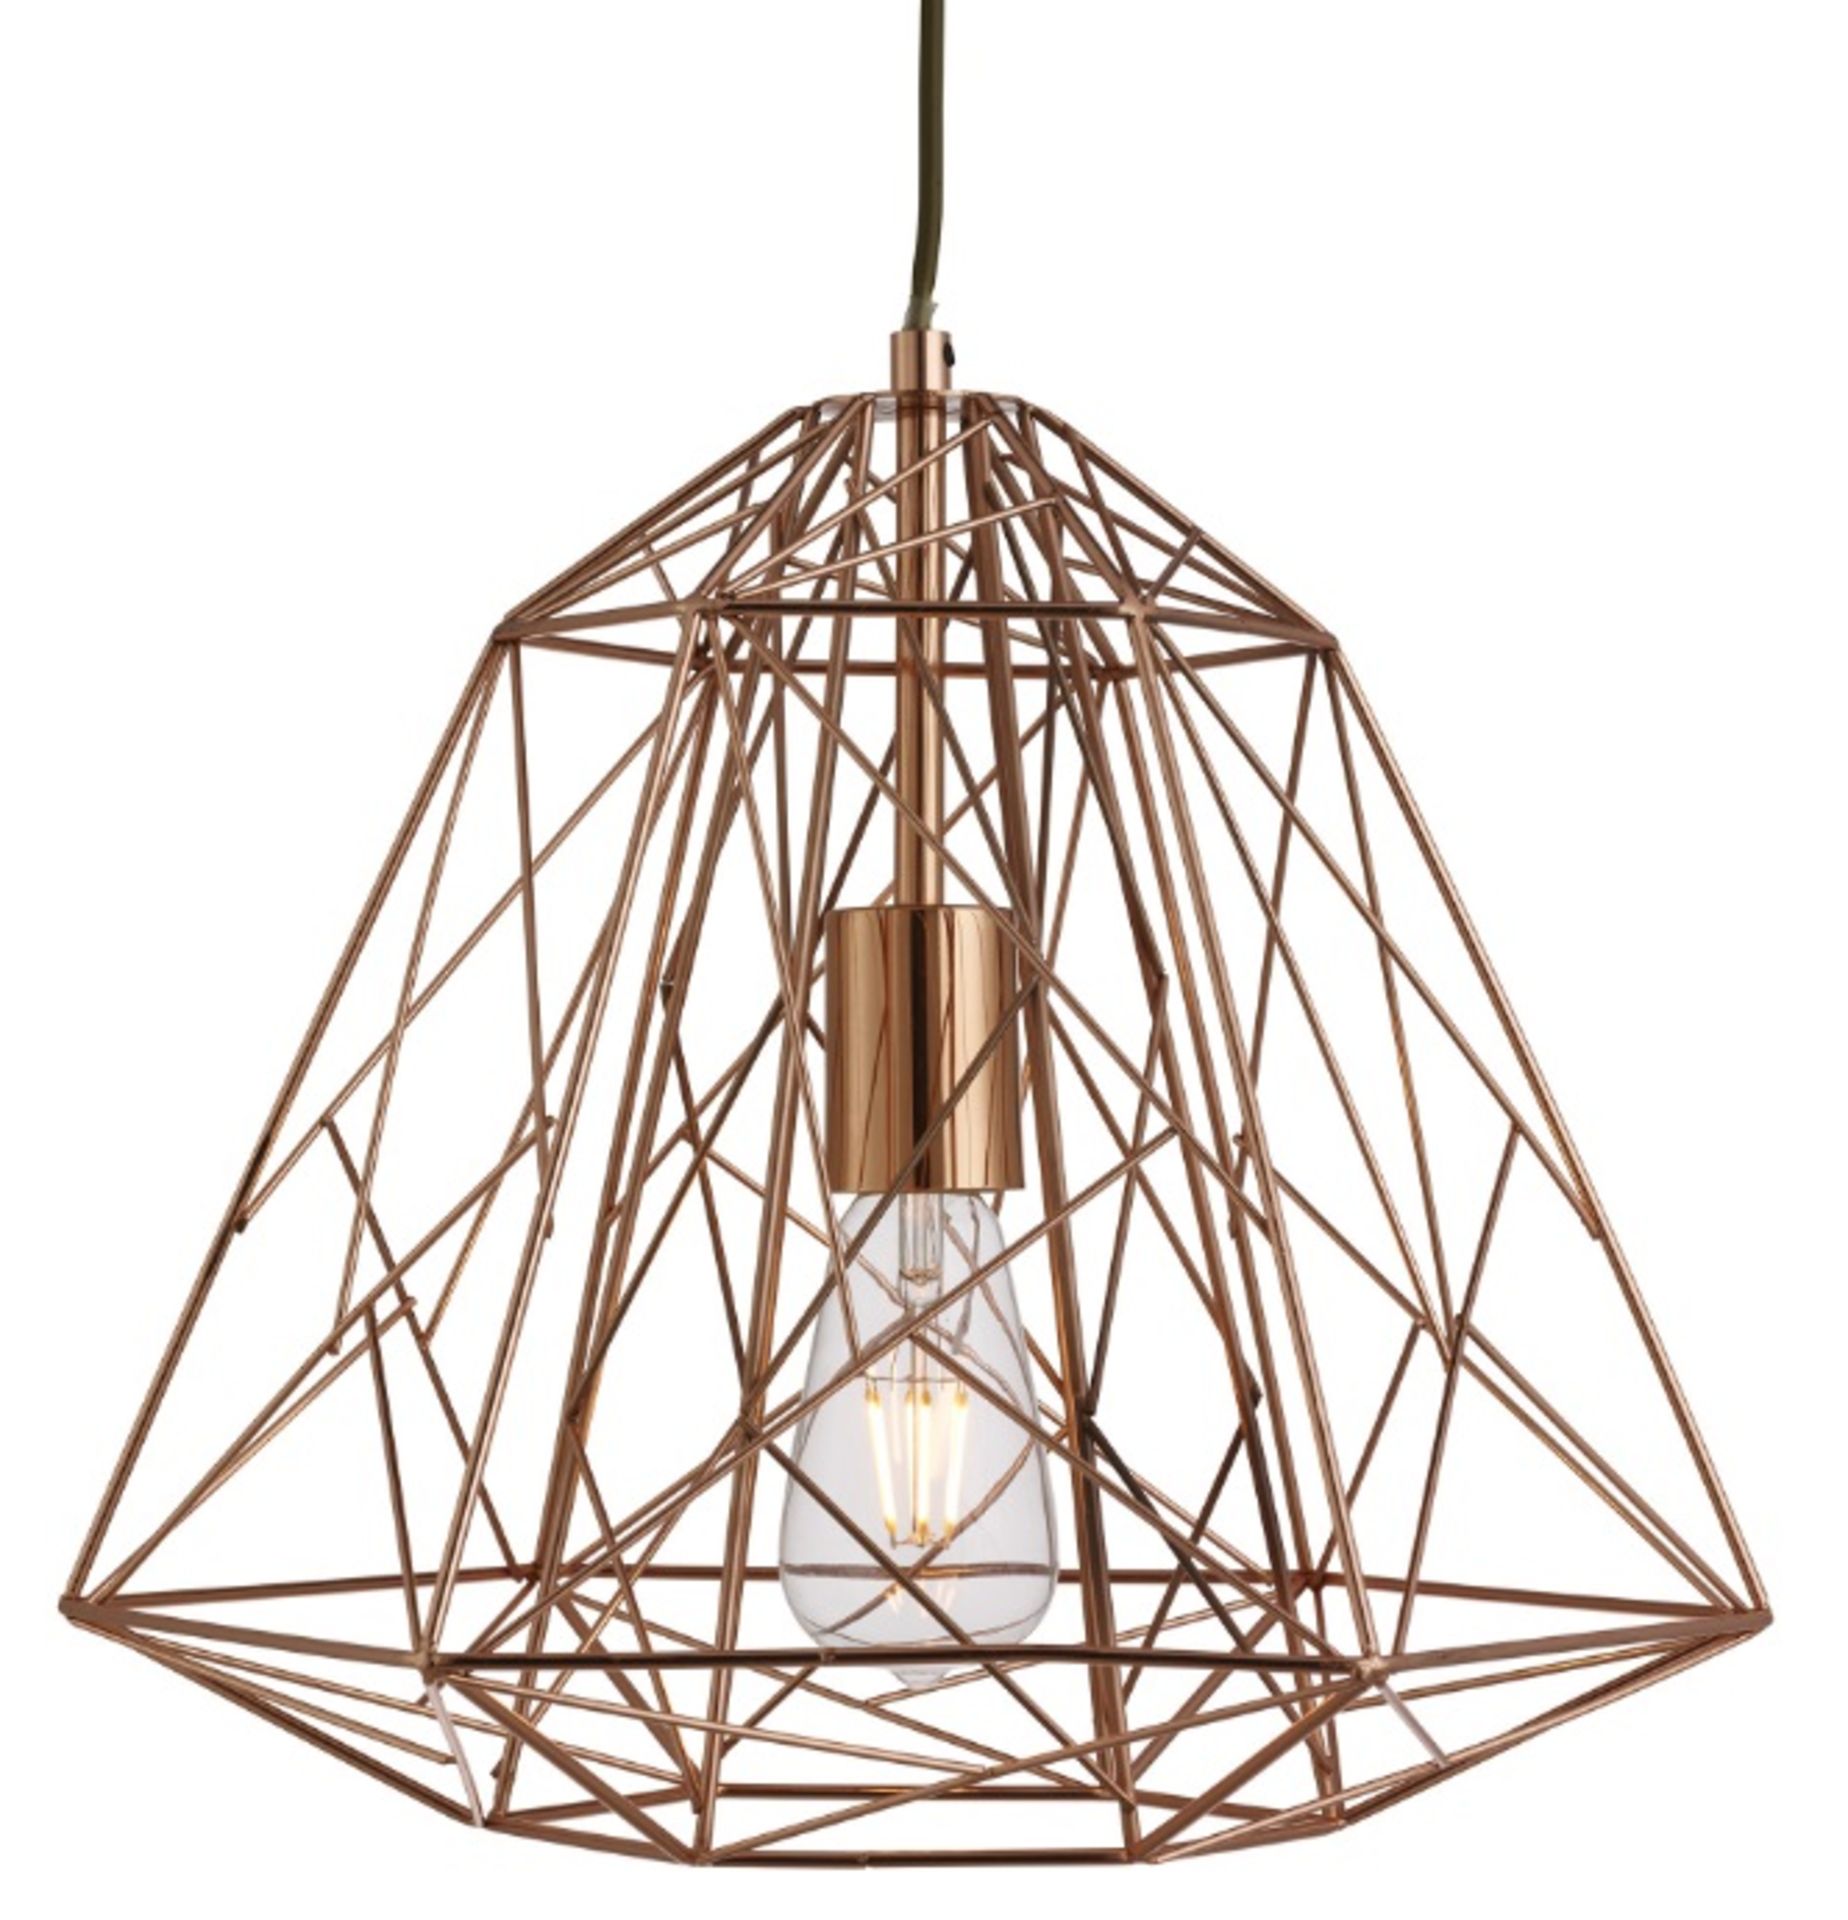 1 x GEOMETRIC Cage Frame Pendant Light Fitting With A Shiny Copper Finish - Ex Display Stock